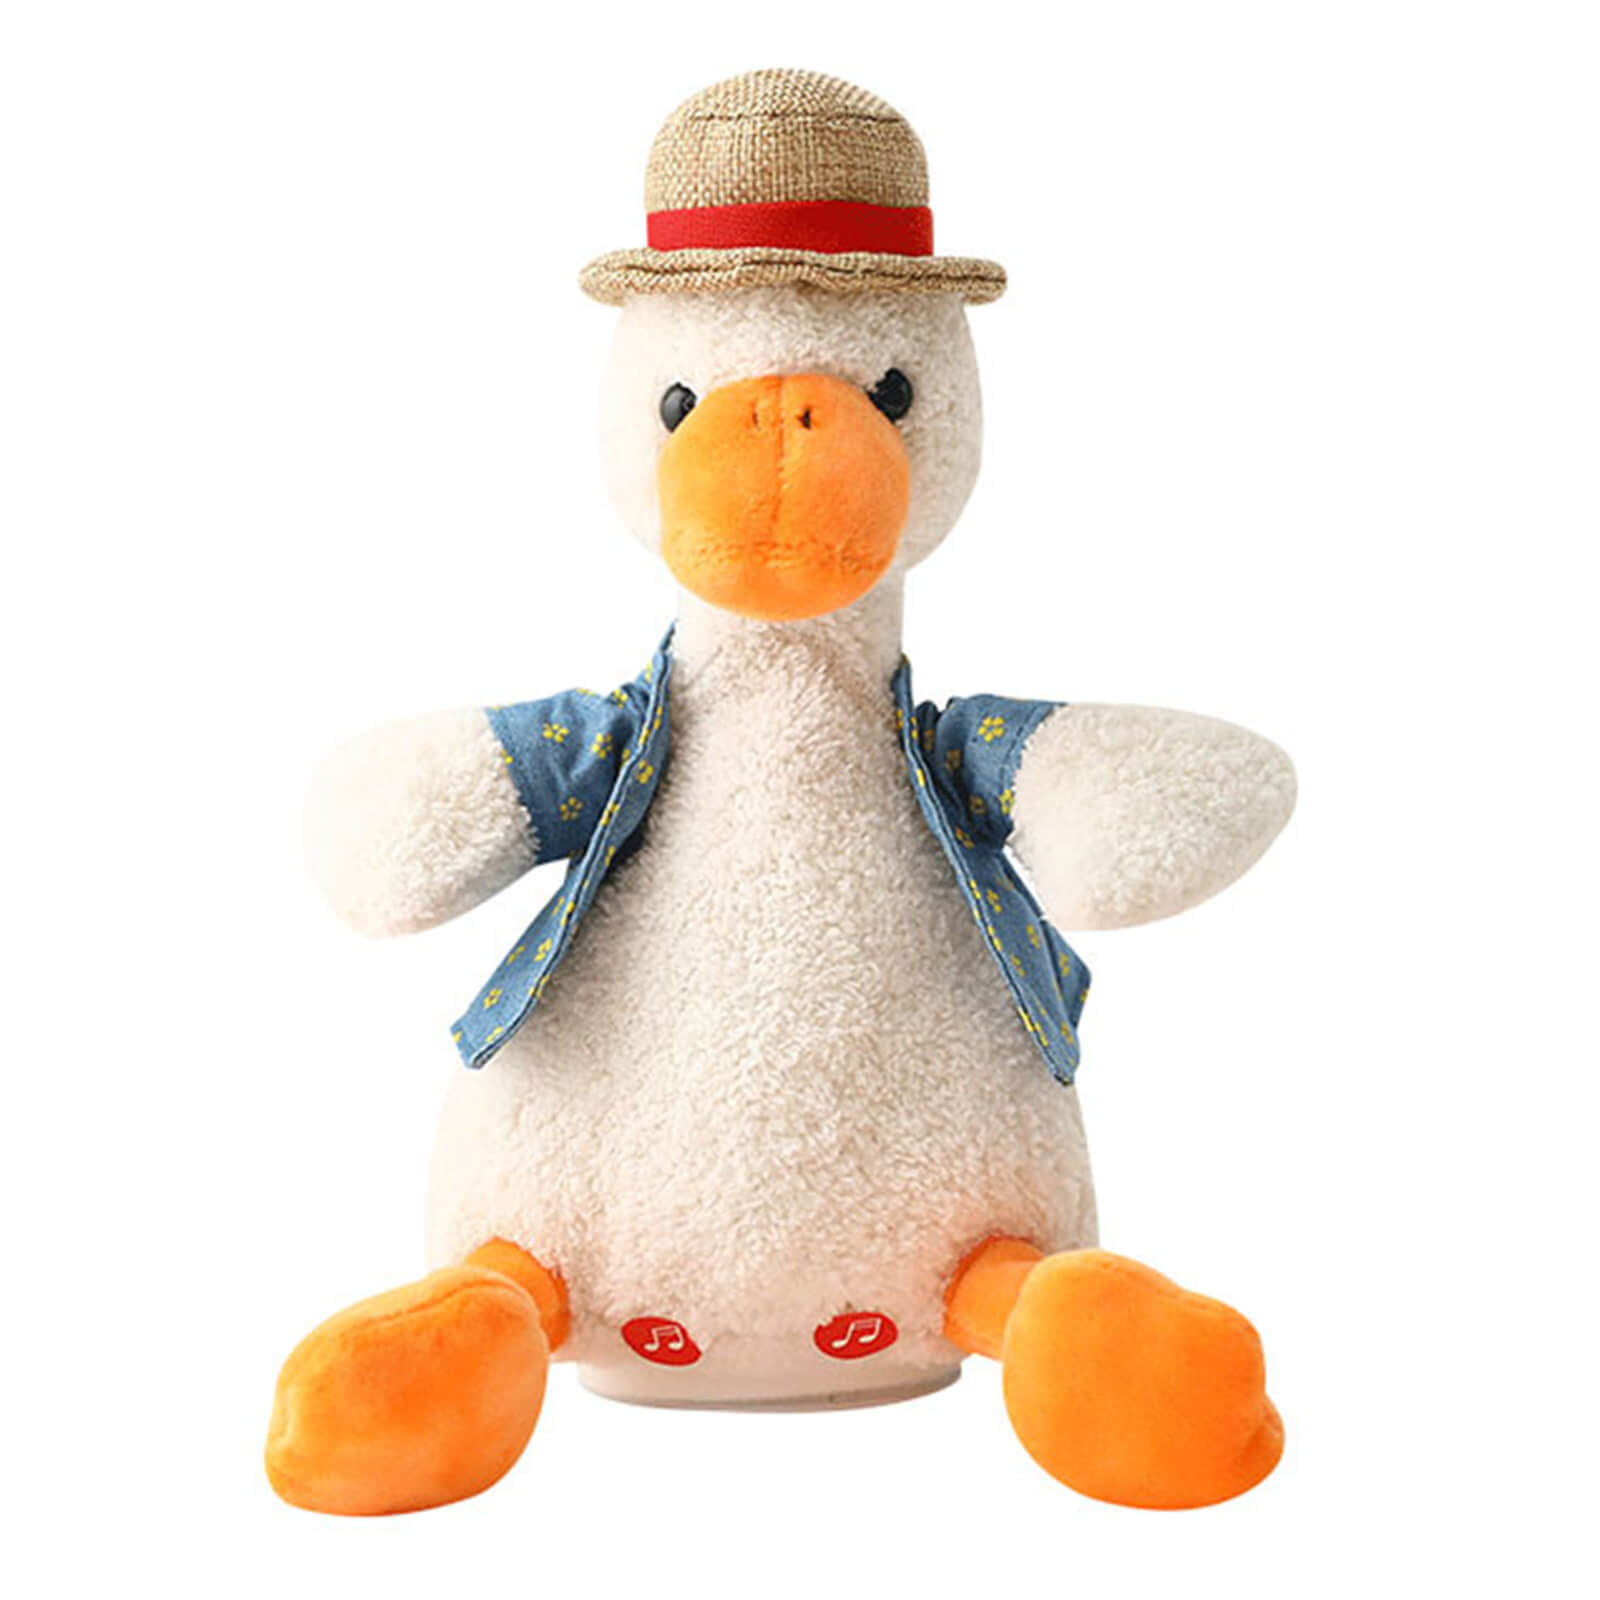 14" Super Soft Cuddly Talking Animal Duck Doll Plush Toy, Christmas Gift for Kids